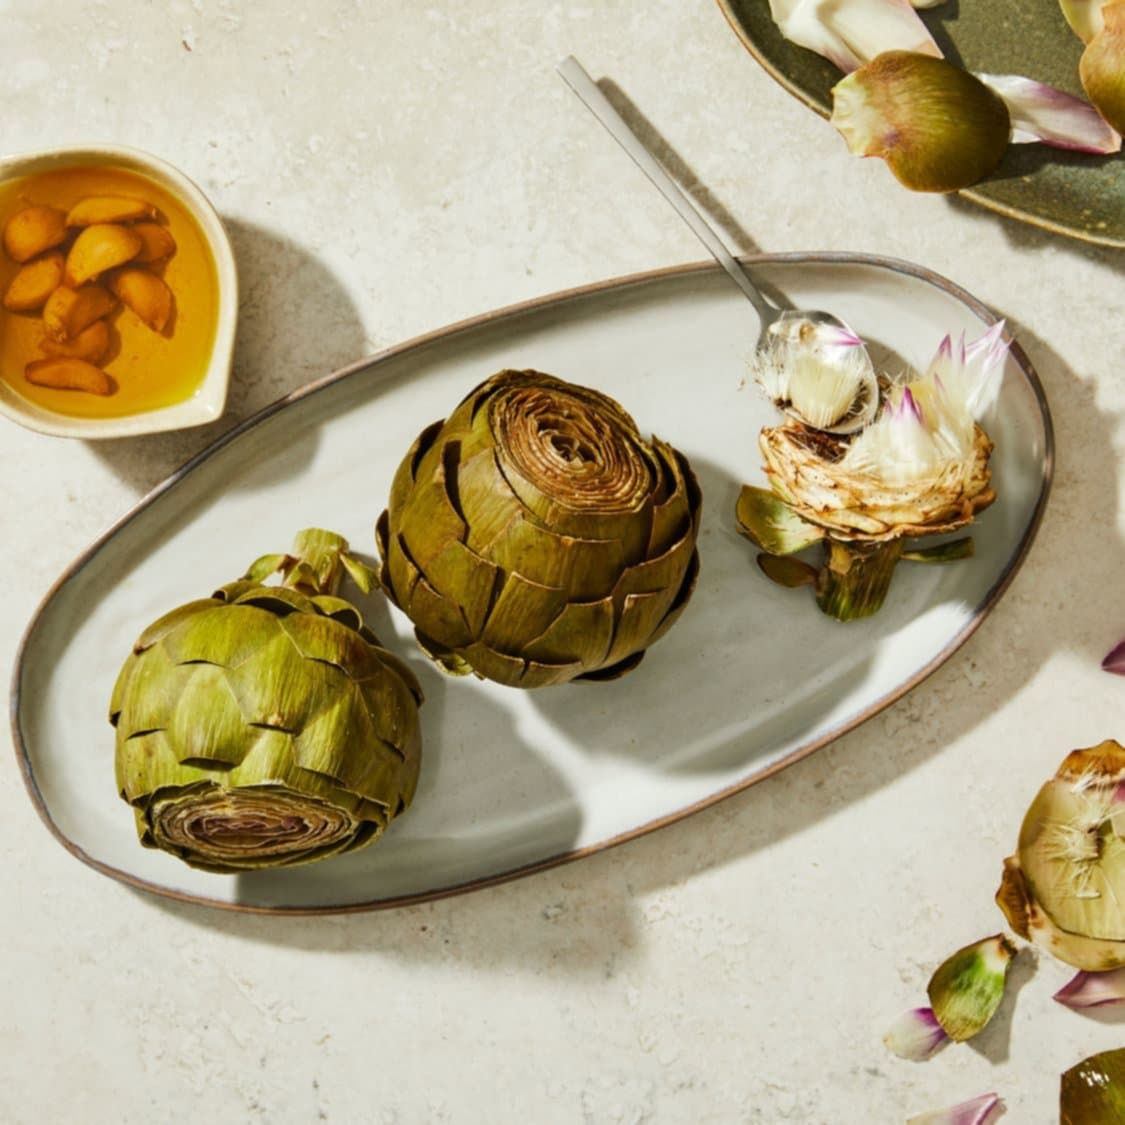 https://fleishigs.com/images/mobile-app/recipes/3461-list-steamed-whole-artichokes-with-garlic-confit.jpg